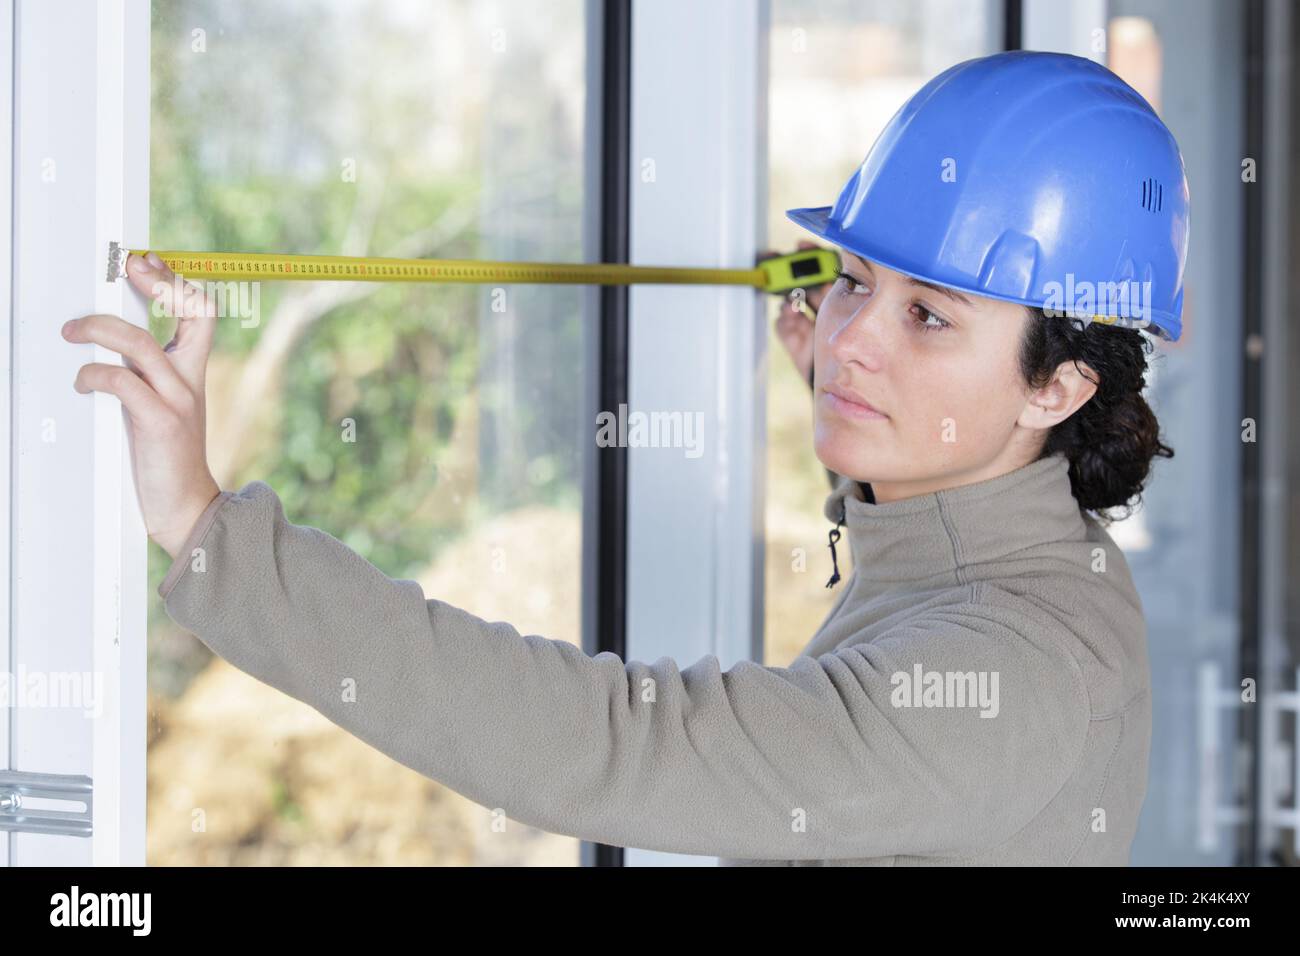 woman measuring a window with tape measure Stock Photo